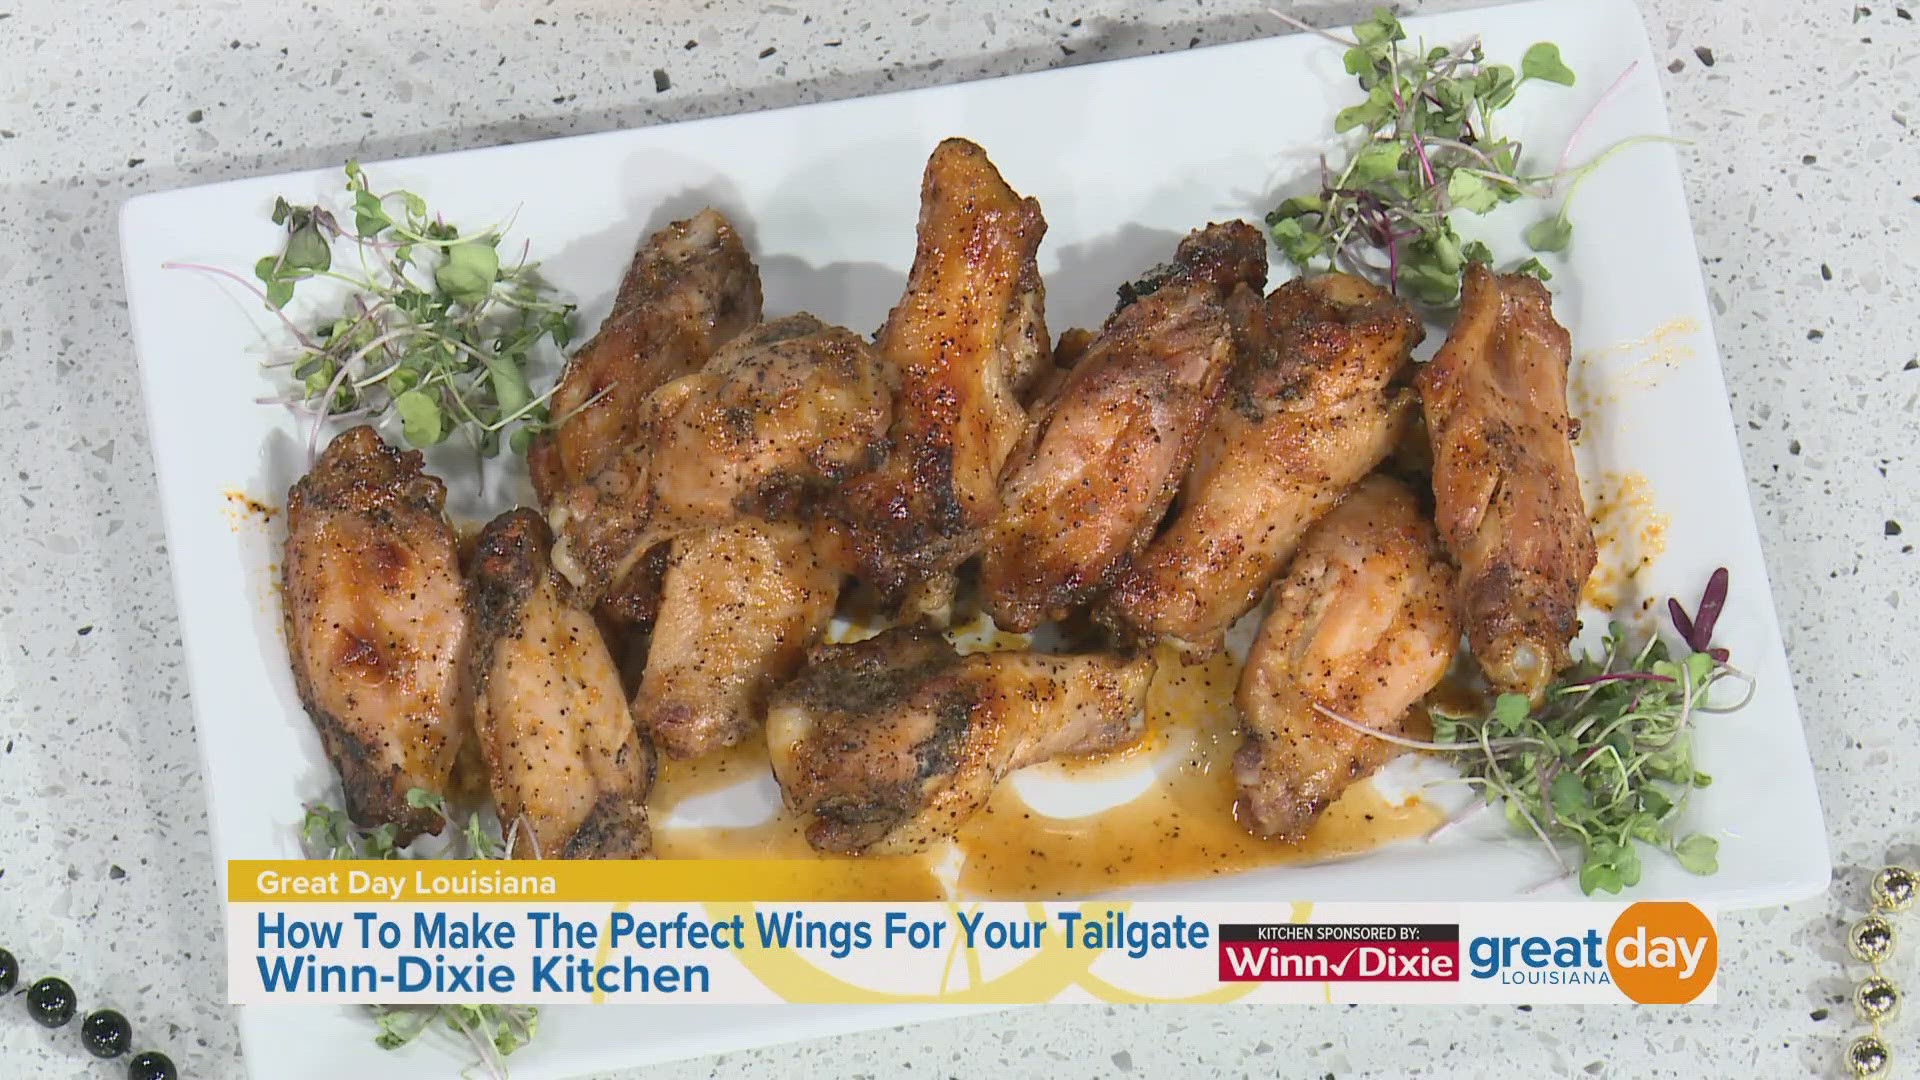 Personal Chef Jaycee Poree, Jr. shows us how to make sure our wings are perfect every time.